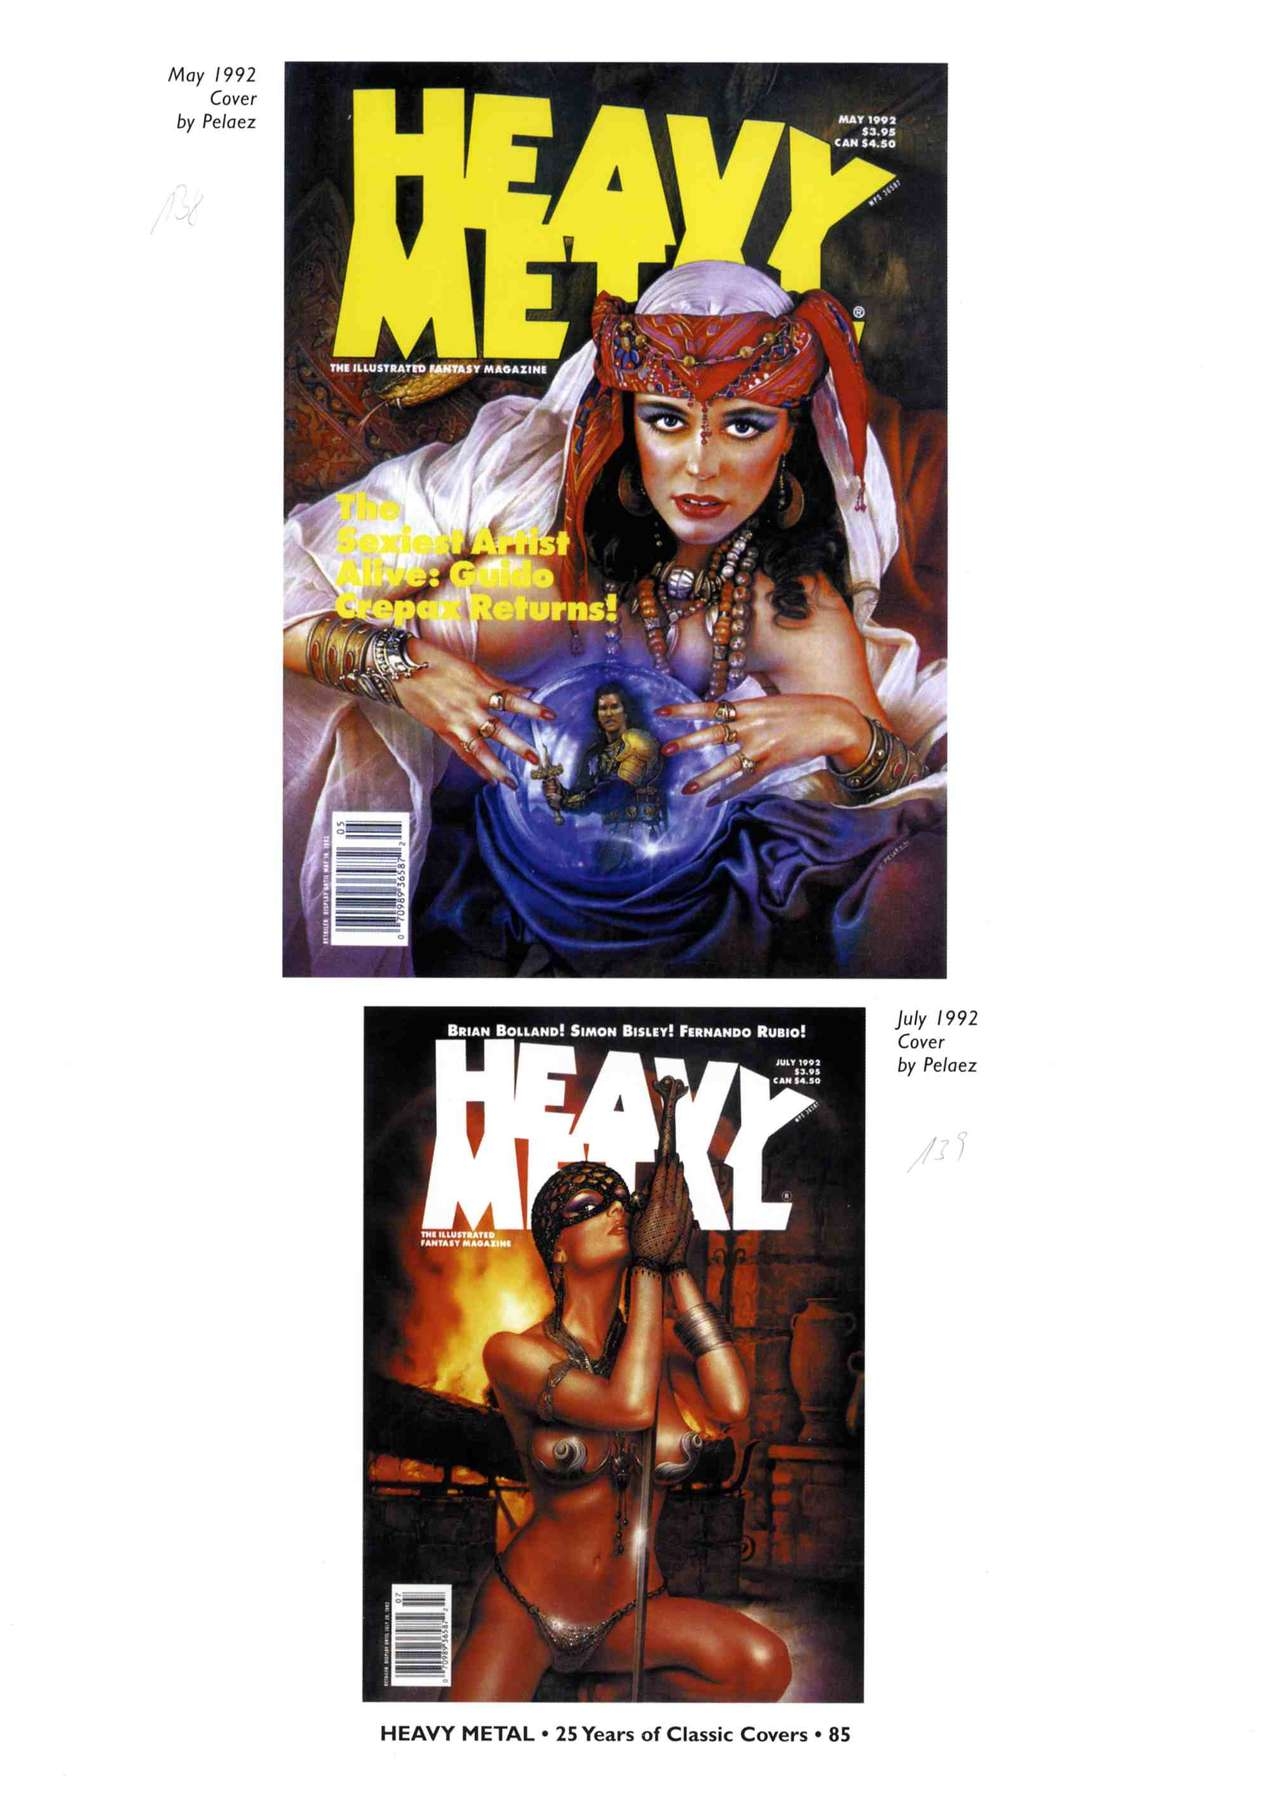 HEAVY METAL 25 Years of Classic Covers 90